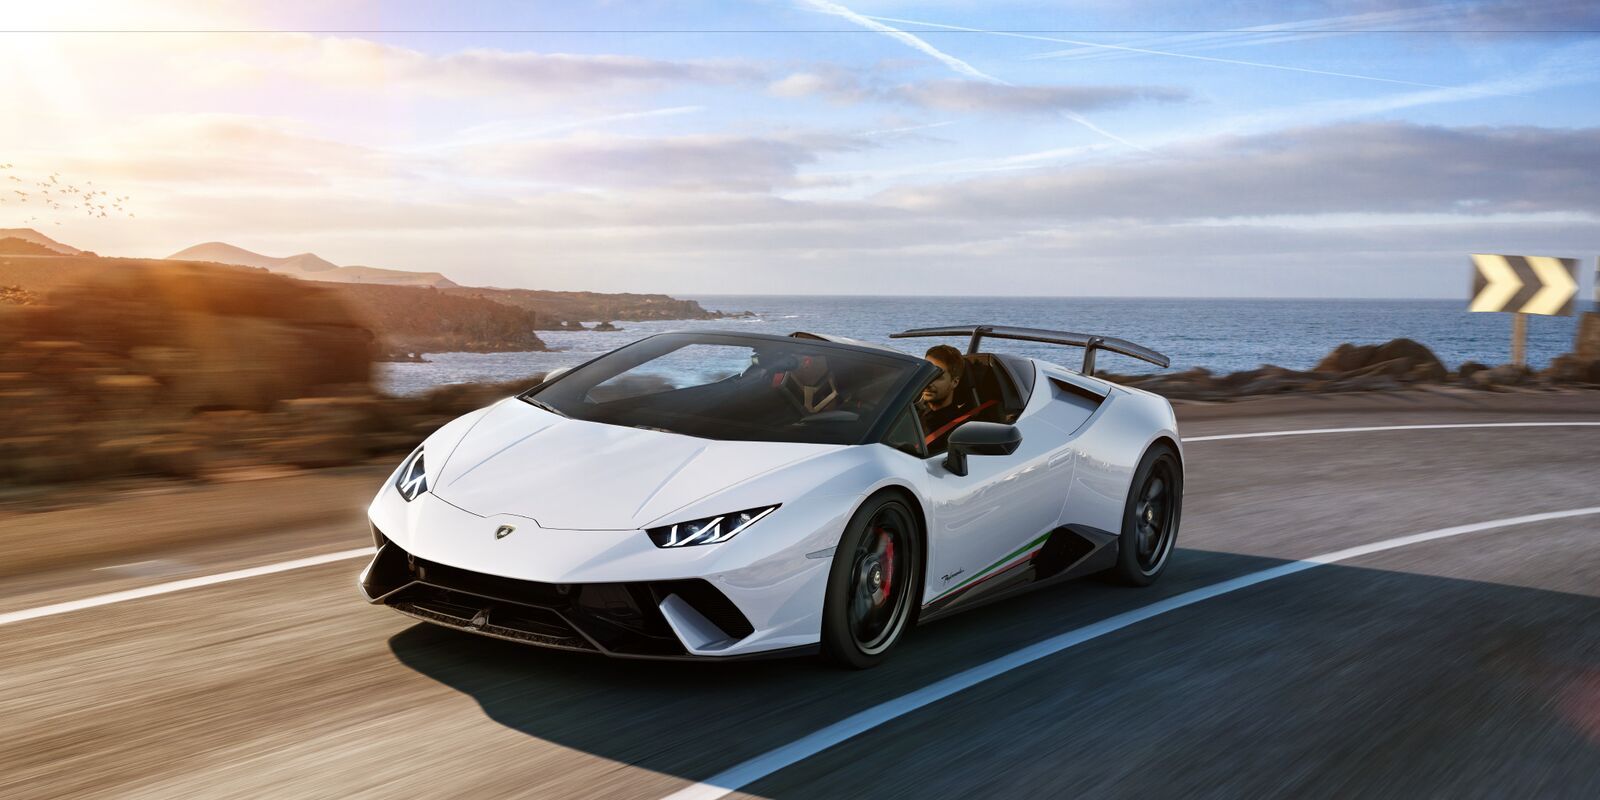 The 2019 Lamborghini Huracan Performante Spyder Pictures, Info, and Pricing